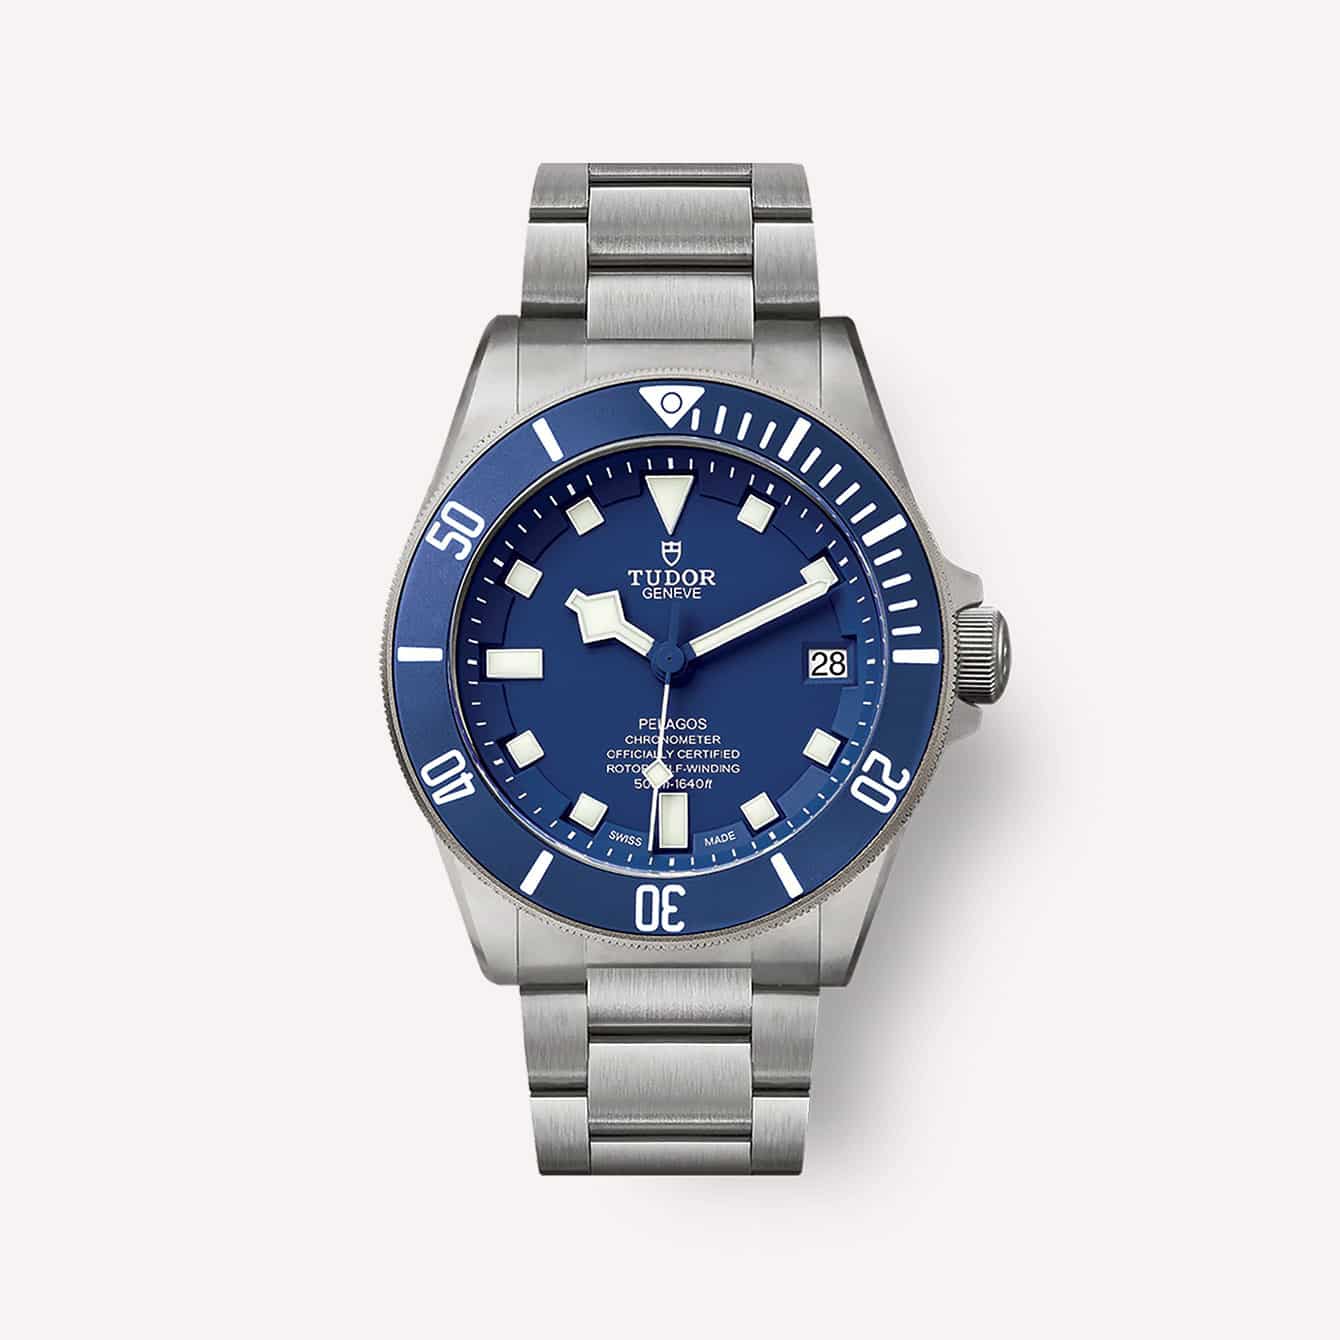 The 10 Best Tudor Watches (According to Experts)-10